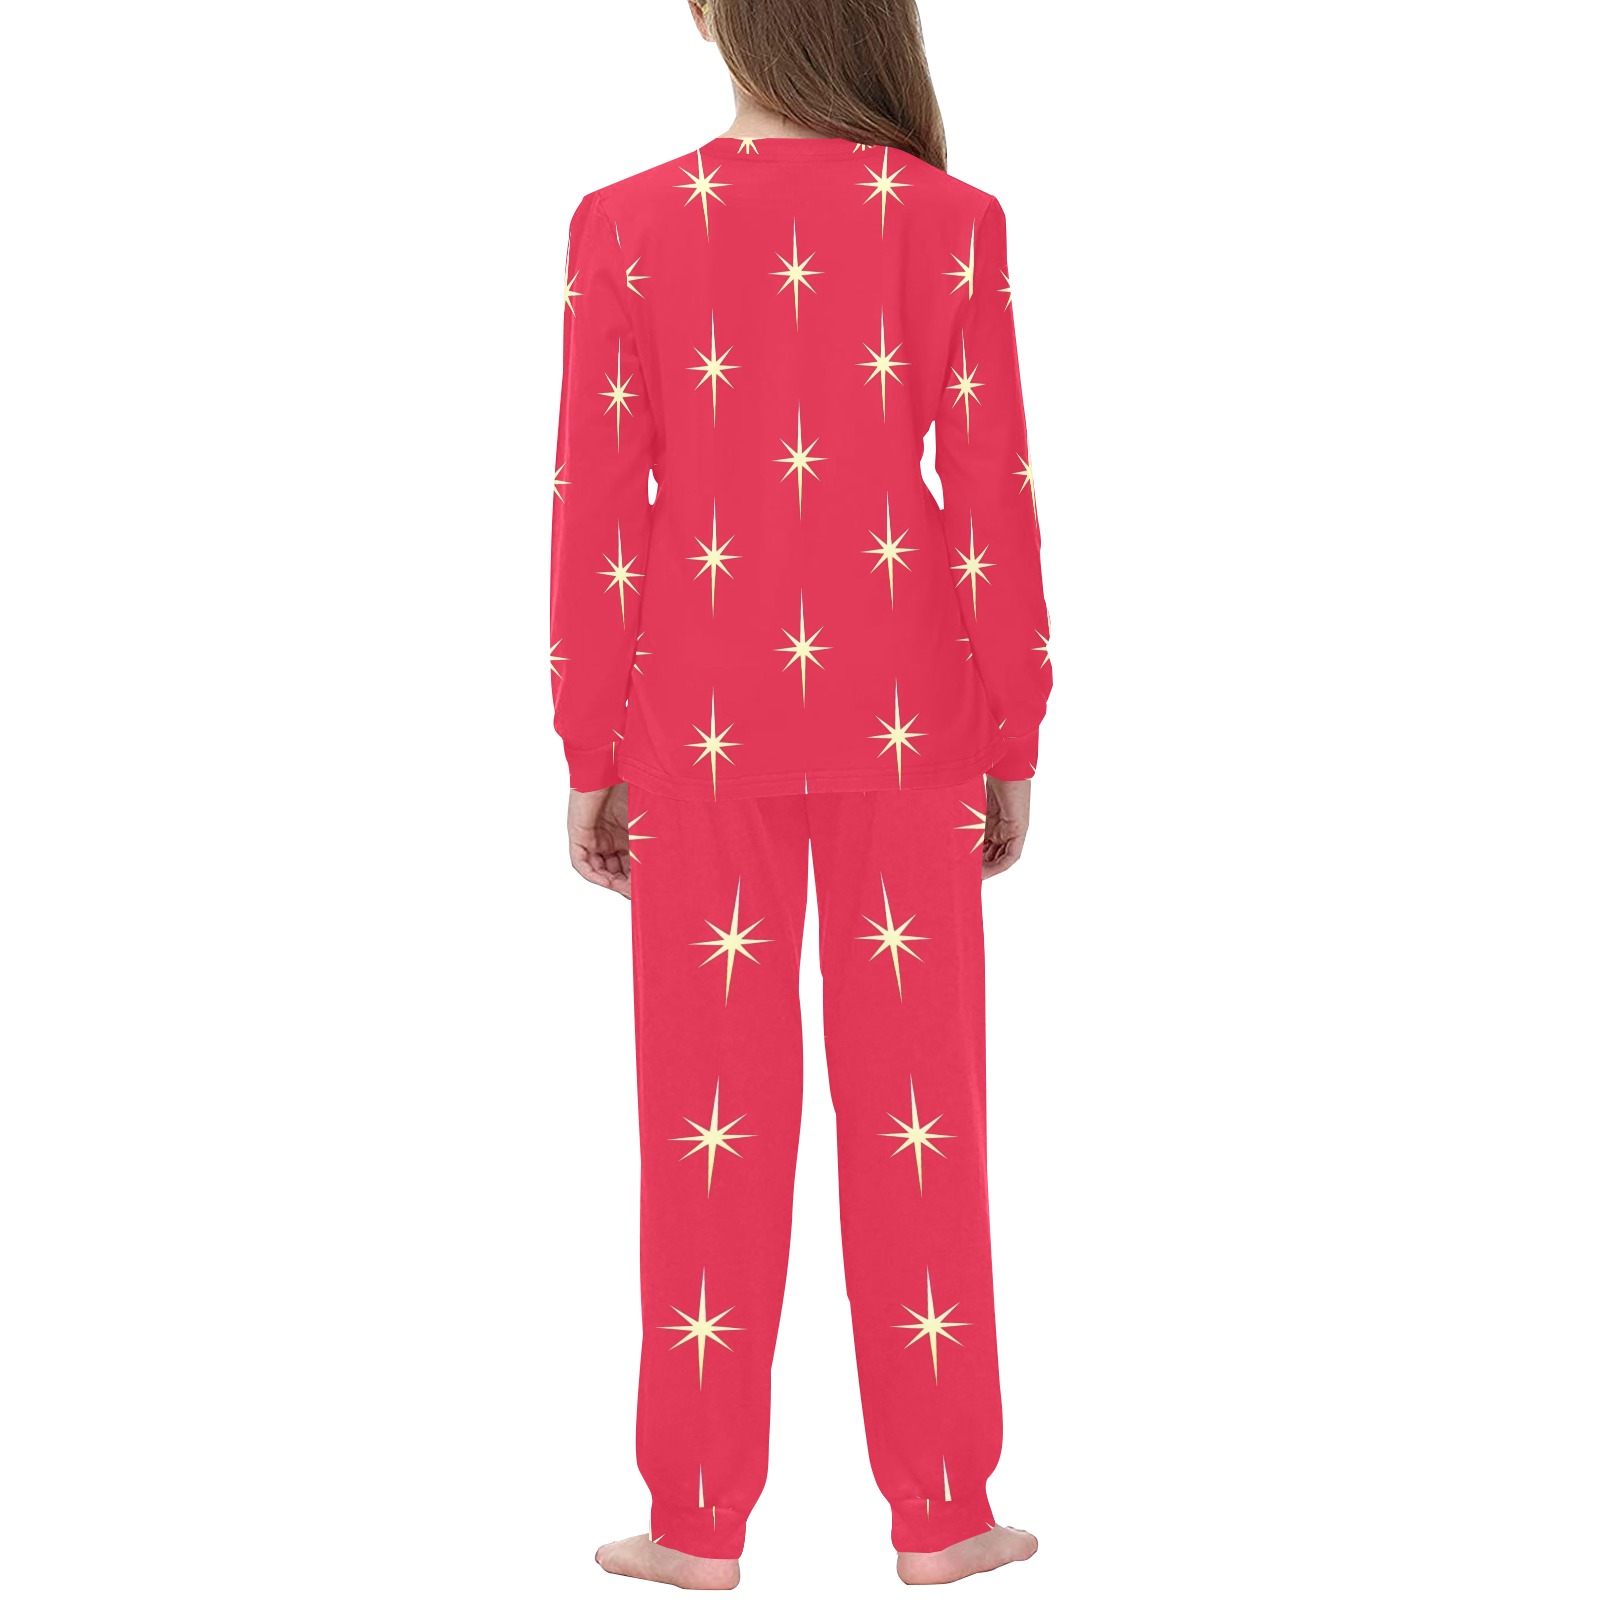 Cure Red and White Xmas Pjs Kids' All Over Print Pajama Set